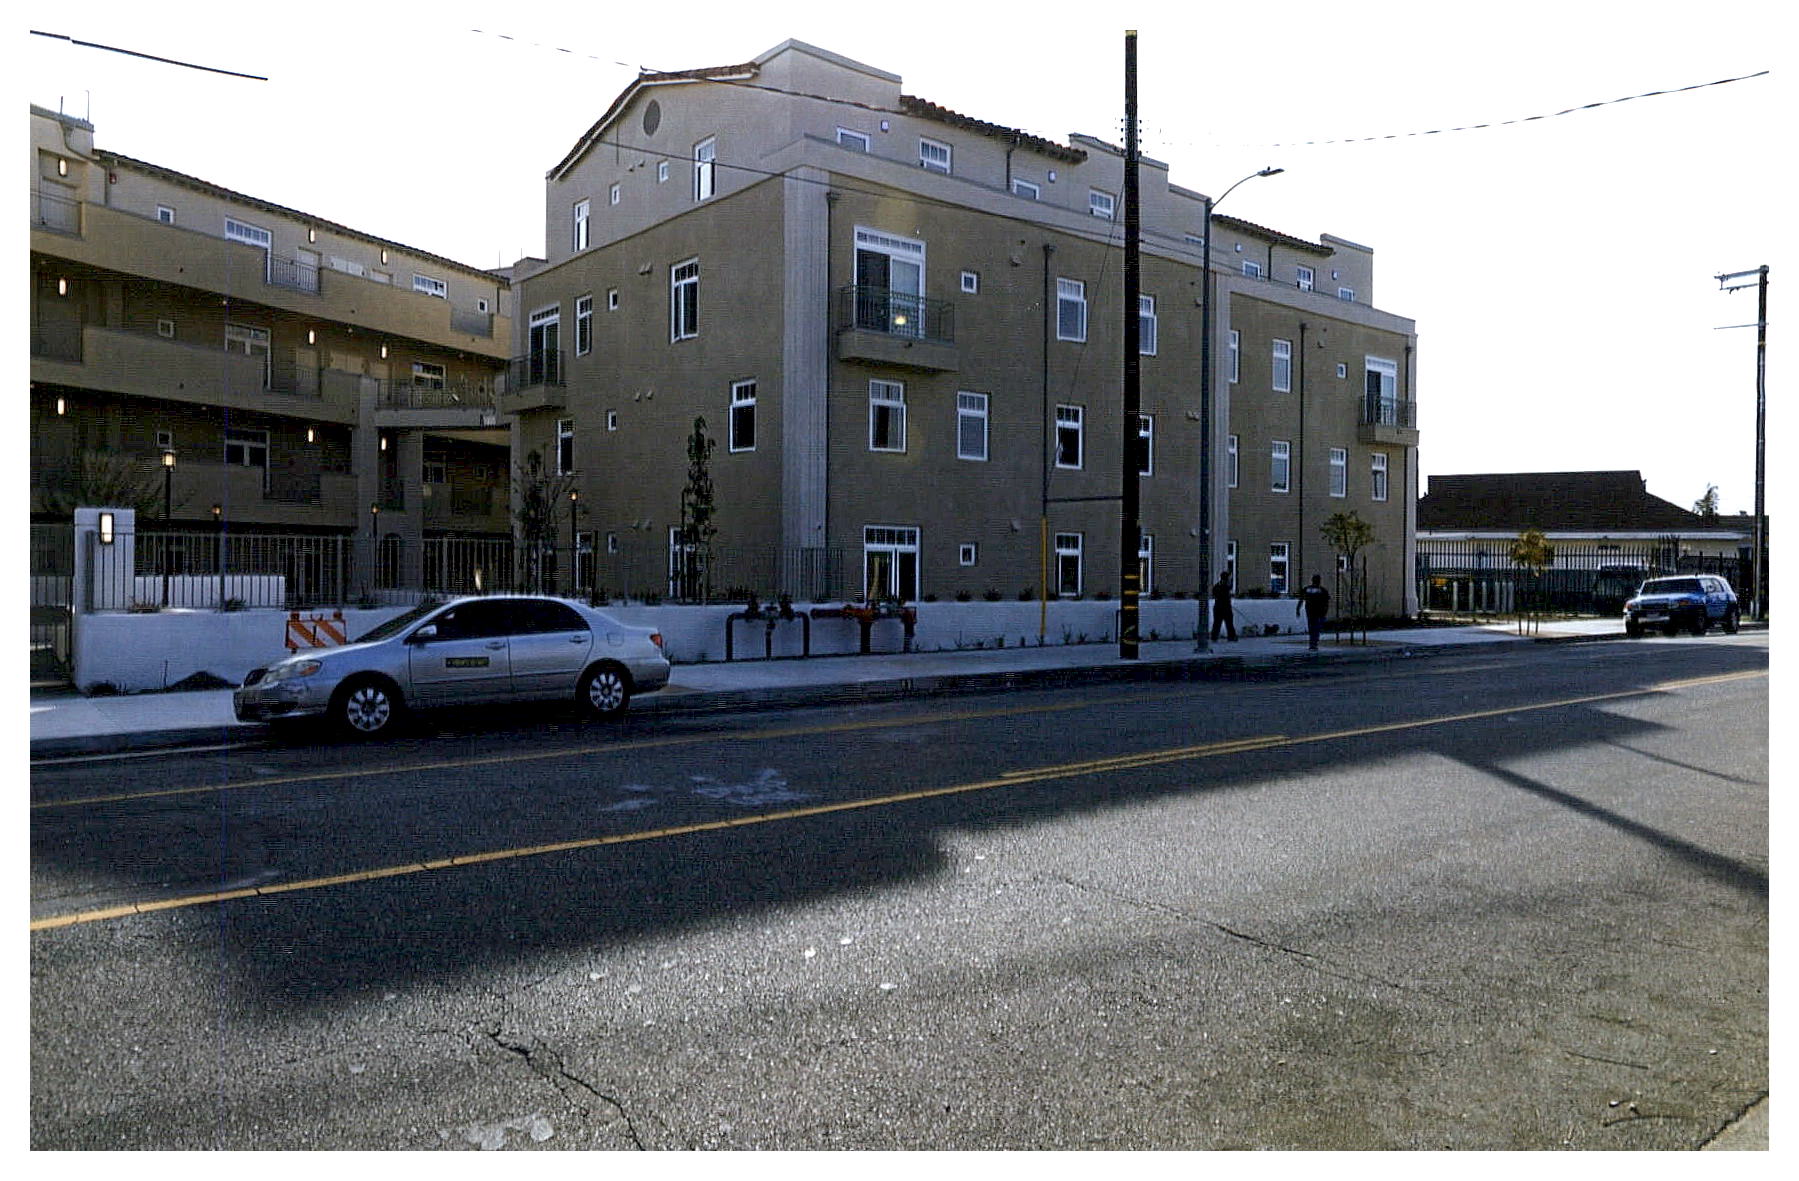 After: view of rear elevation showing four floor apartment building new construction on the site.